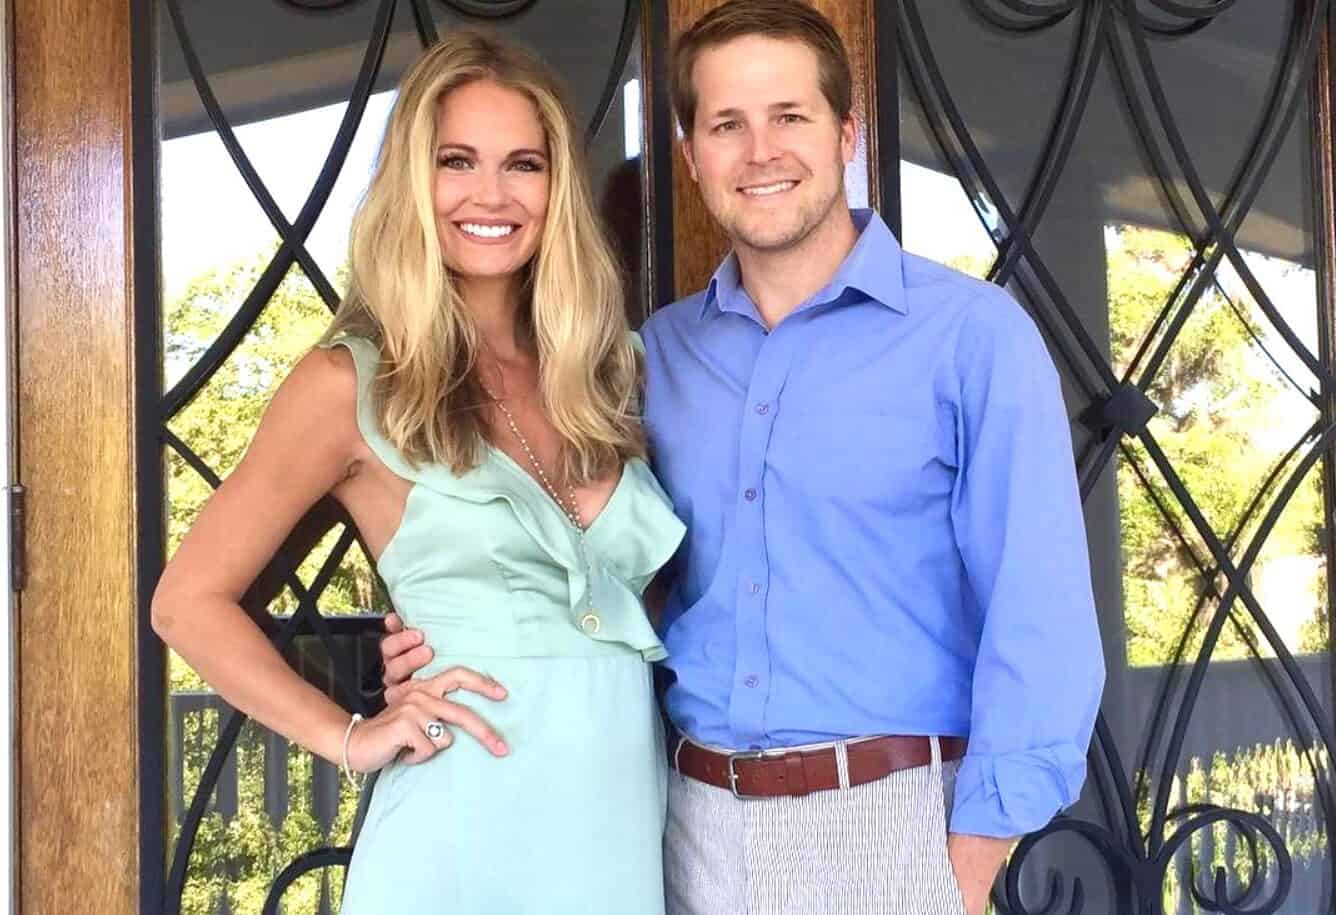 Cameran Eubanks Reveals Original Title of Southern Charm and Claims Bravo Seeks Out "Moldable" Cast Members, Plus Admits She Was Nearly Fired and Suggests Jason Wimberly Rumors Were Punishment From Production